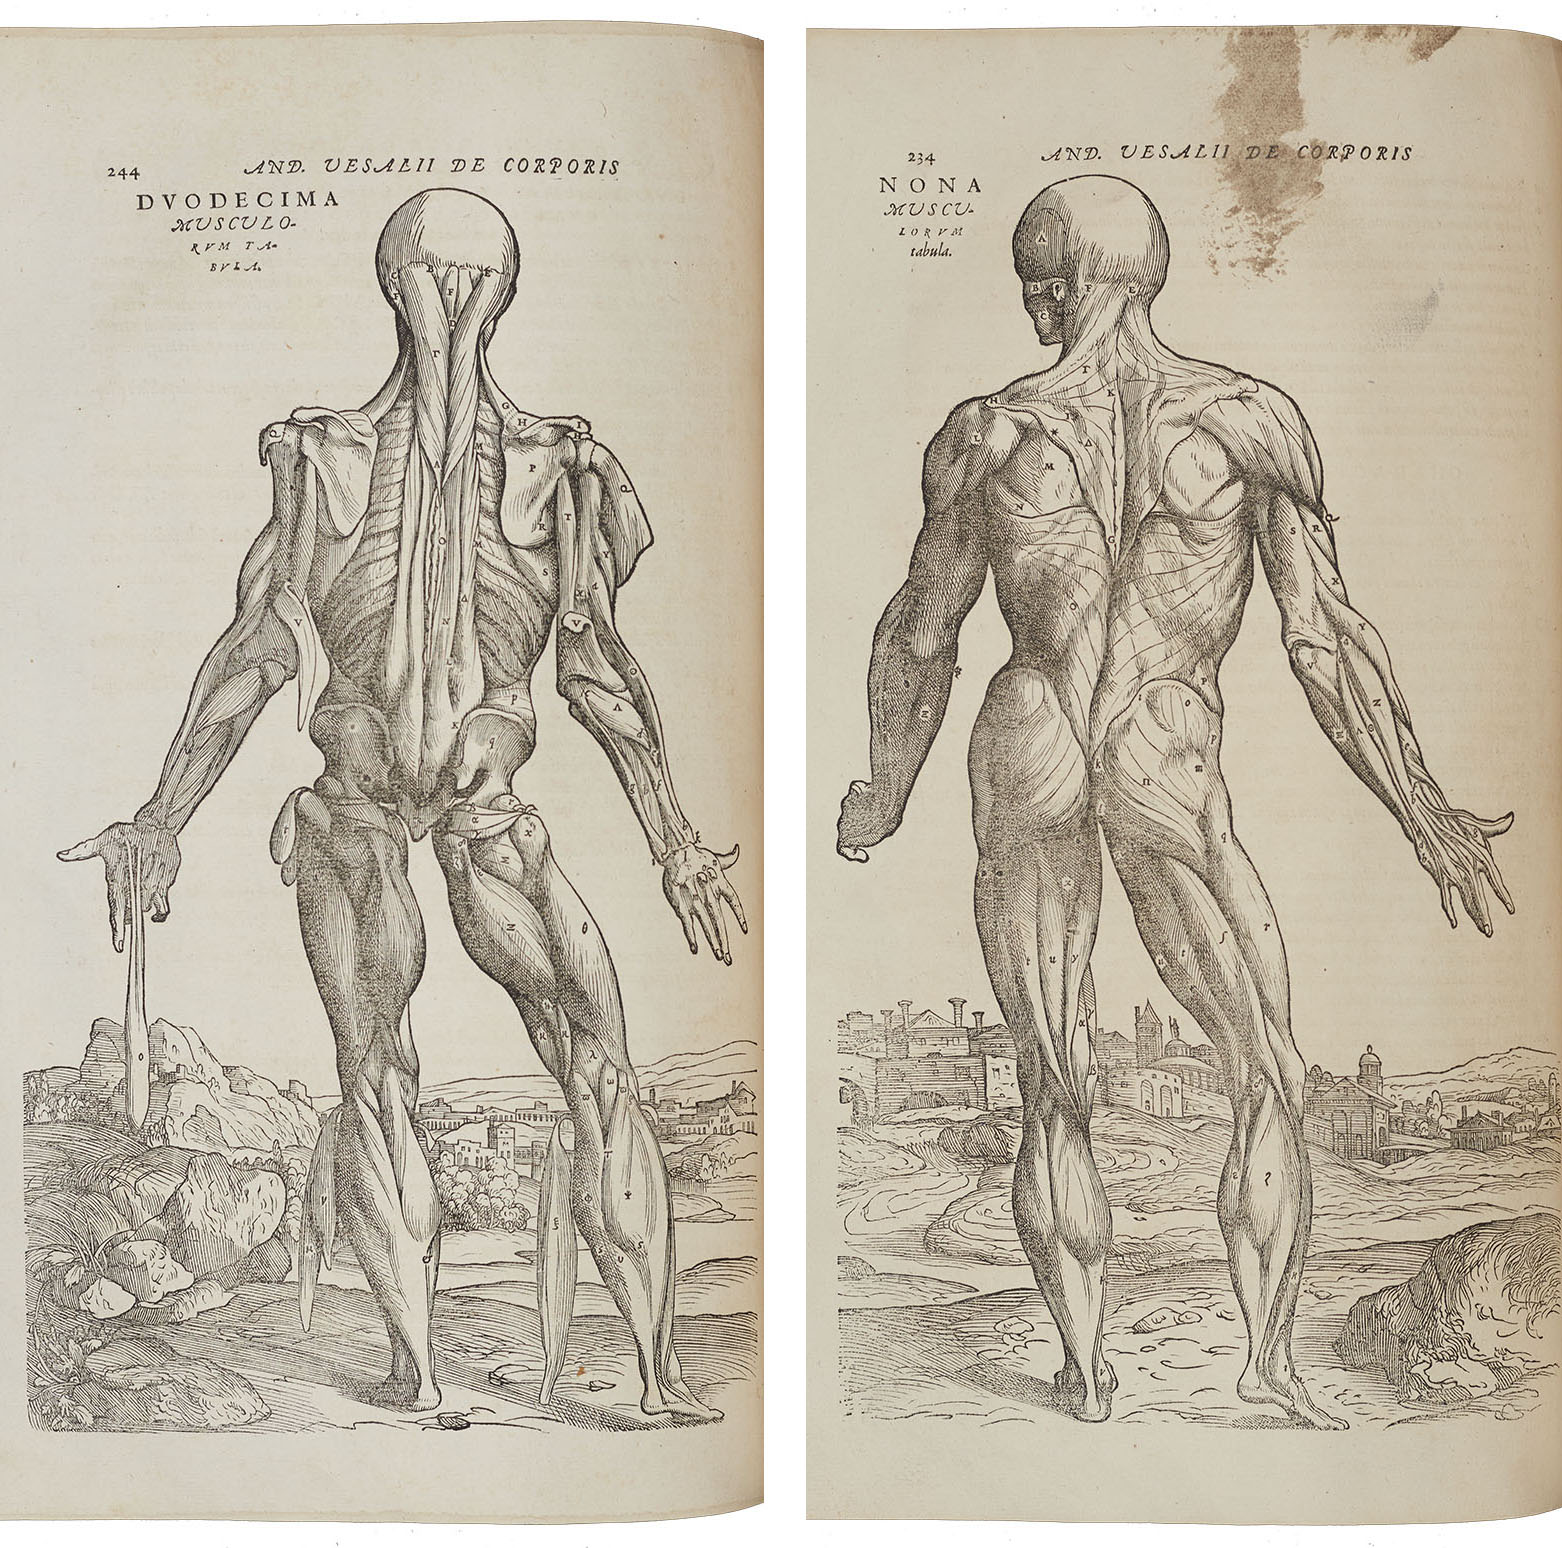 Andreas Vesalius – The father of modern anatomy | Complete Anatomy